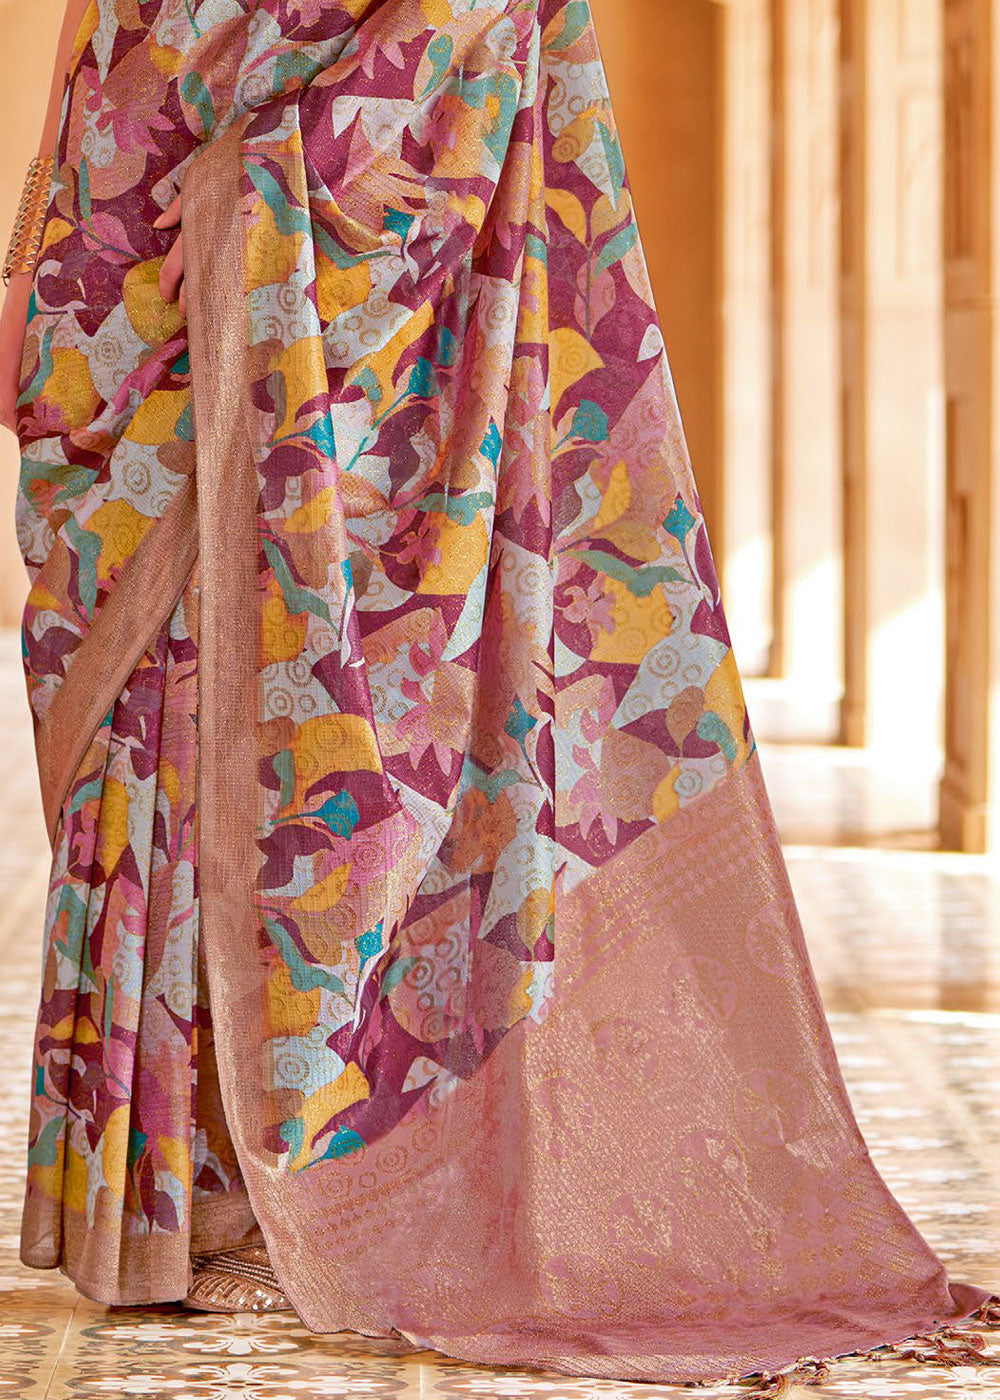 Buy MySilkLove Cadillac Purple and Brown Floral Printed Cotton Silk Saree Online